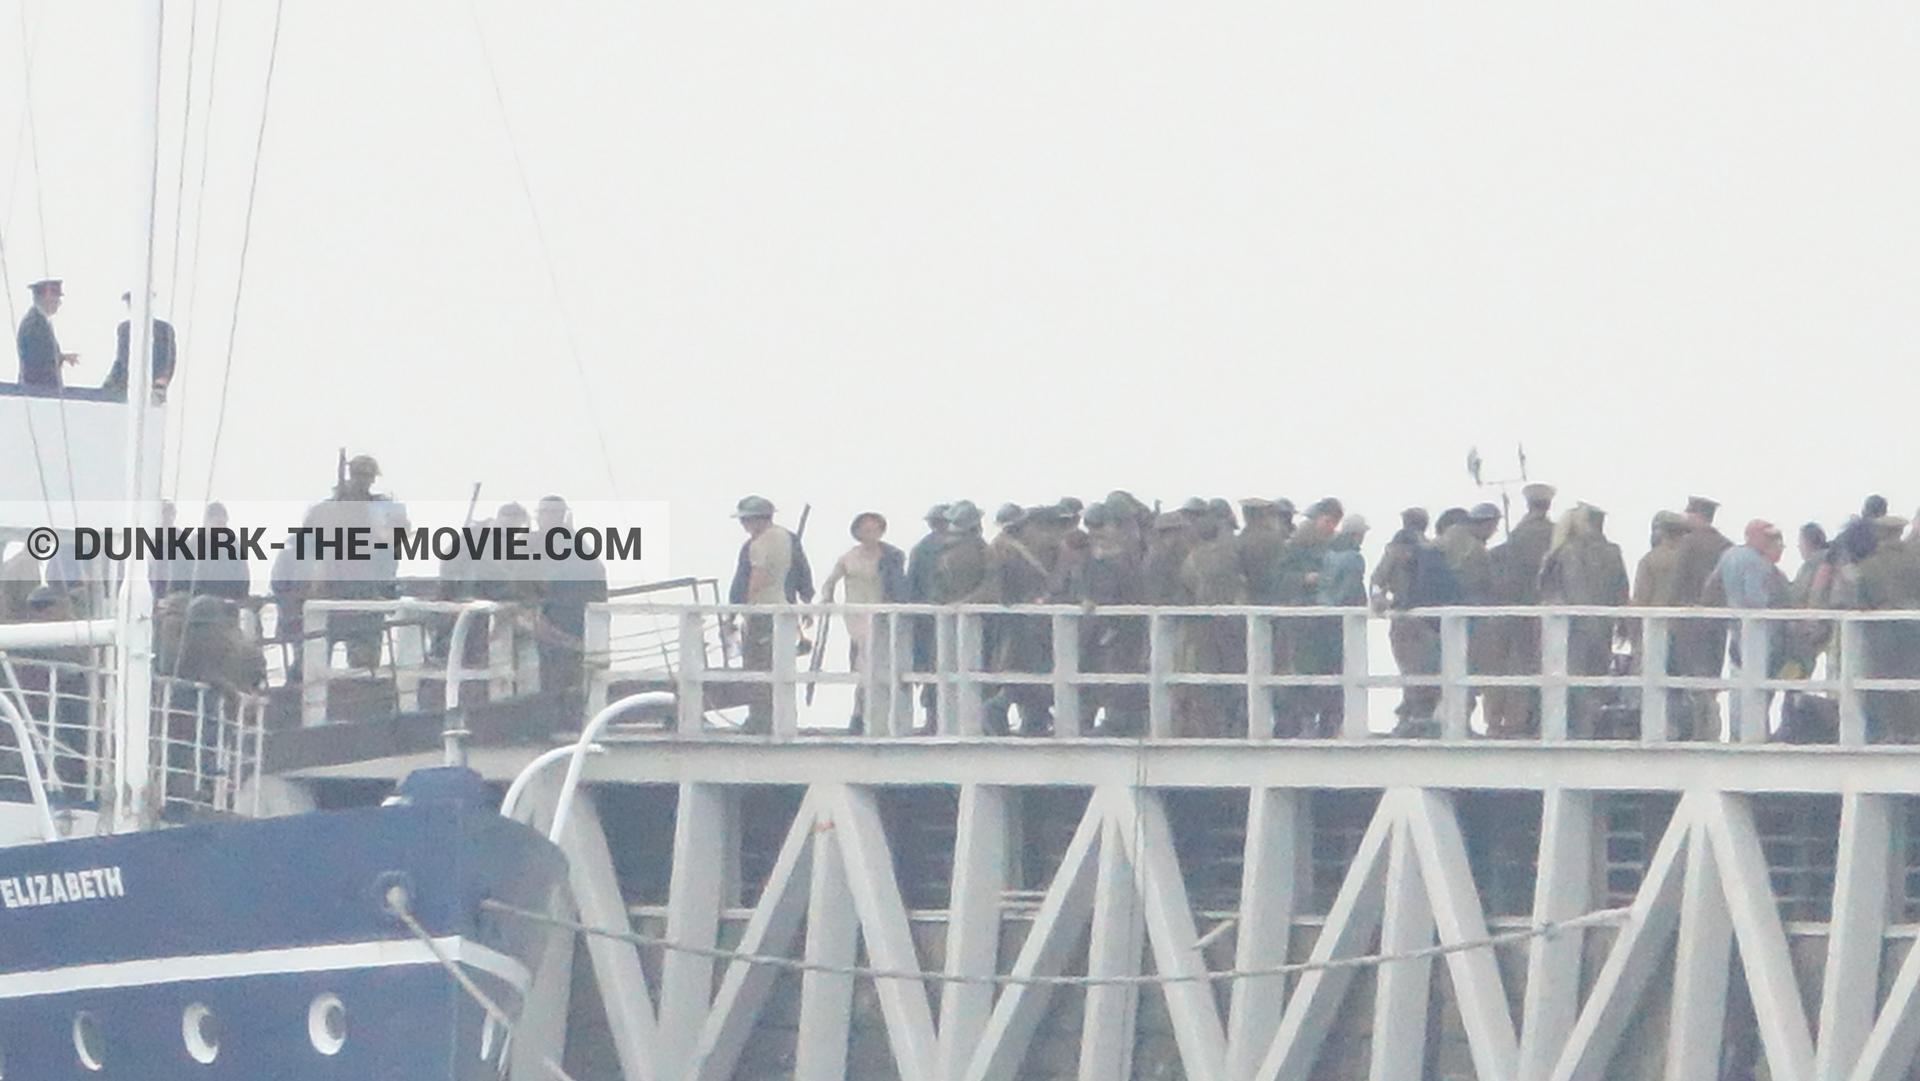 Picture with supernumeraries, EST pier, Princess Elizabeth,  from behind the scene of the Dunkirk movie by Nolan